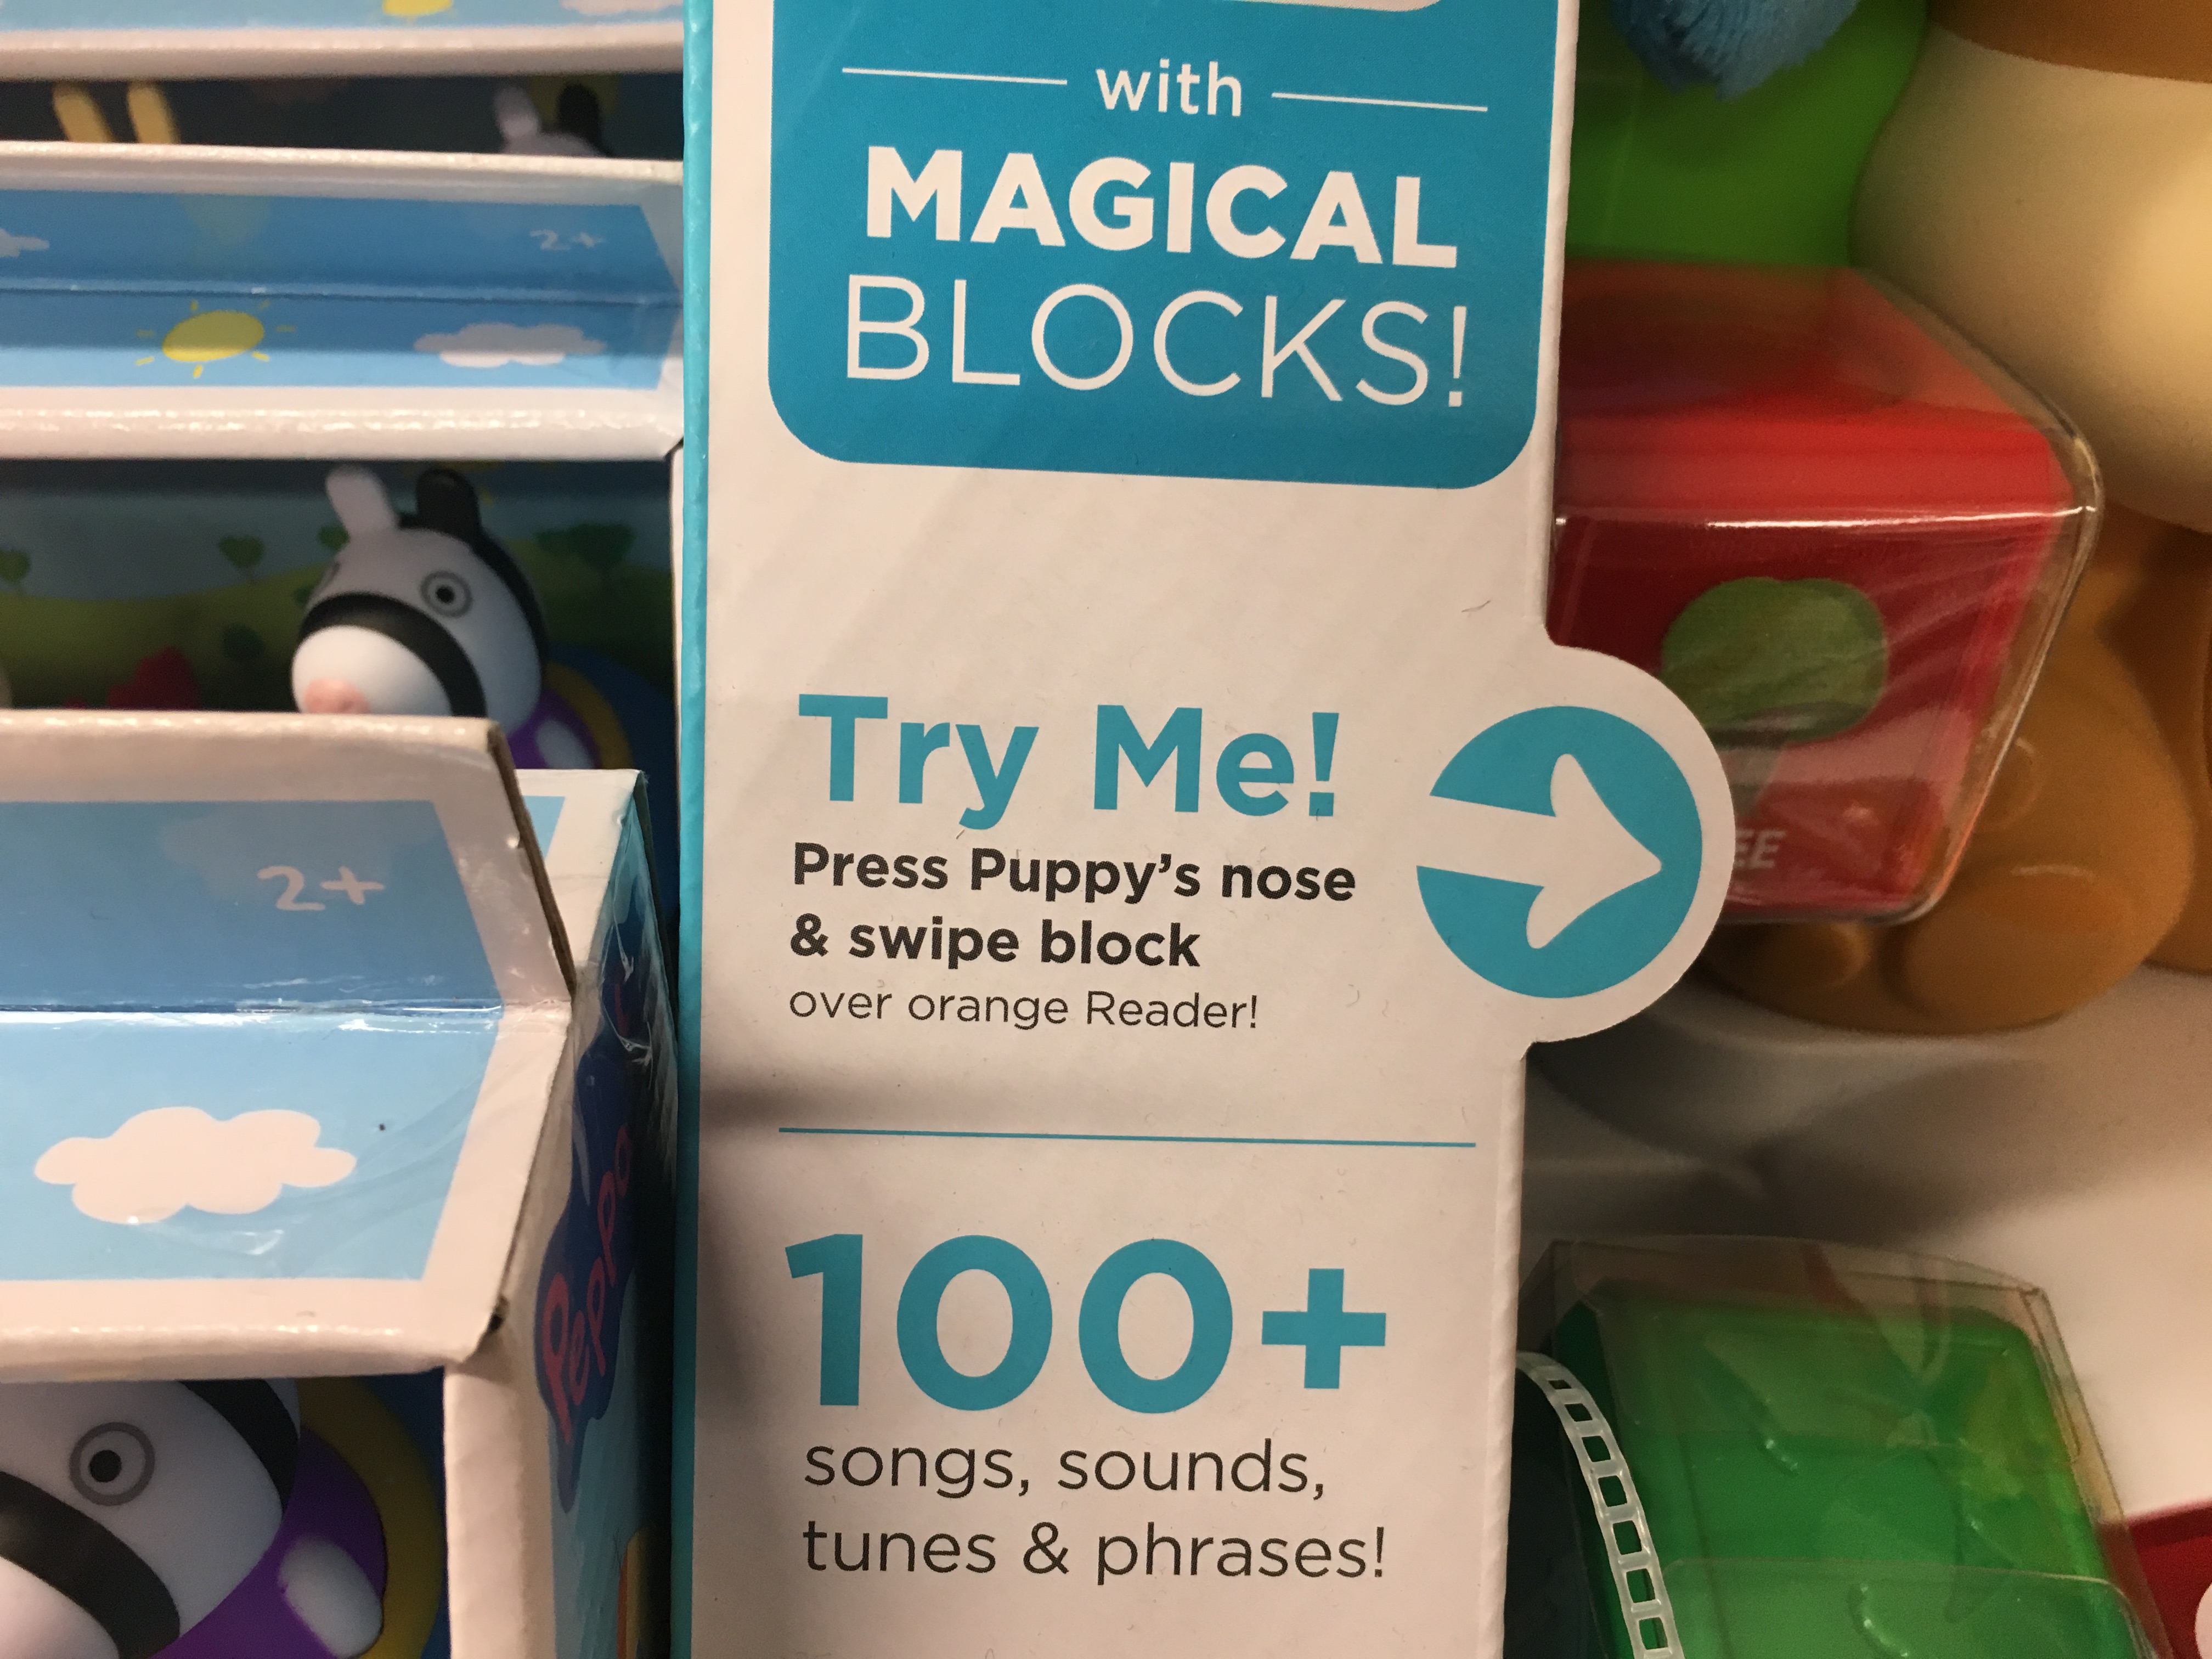 Hundreds of toys at Kmart, Target and Toys R Us feature a "Try Me" label